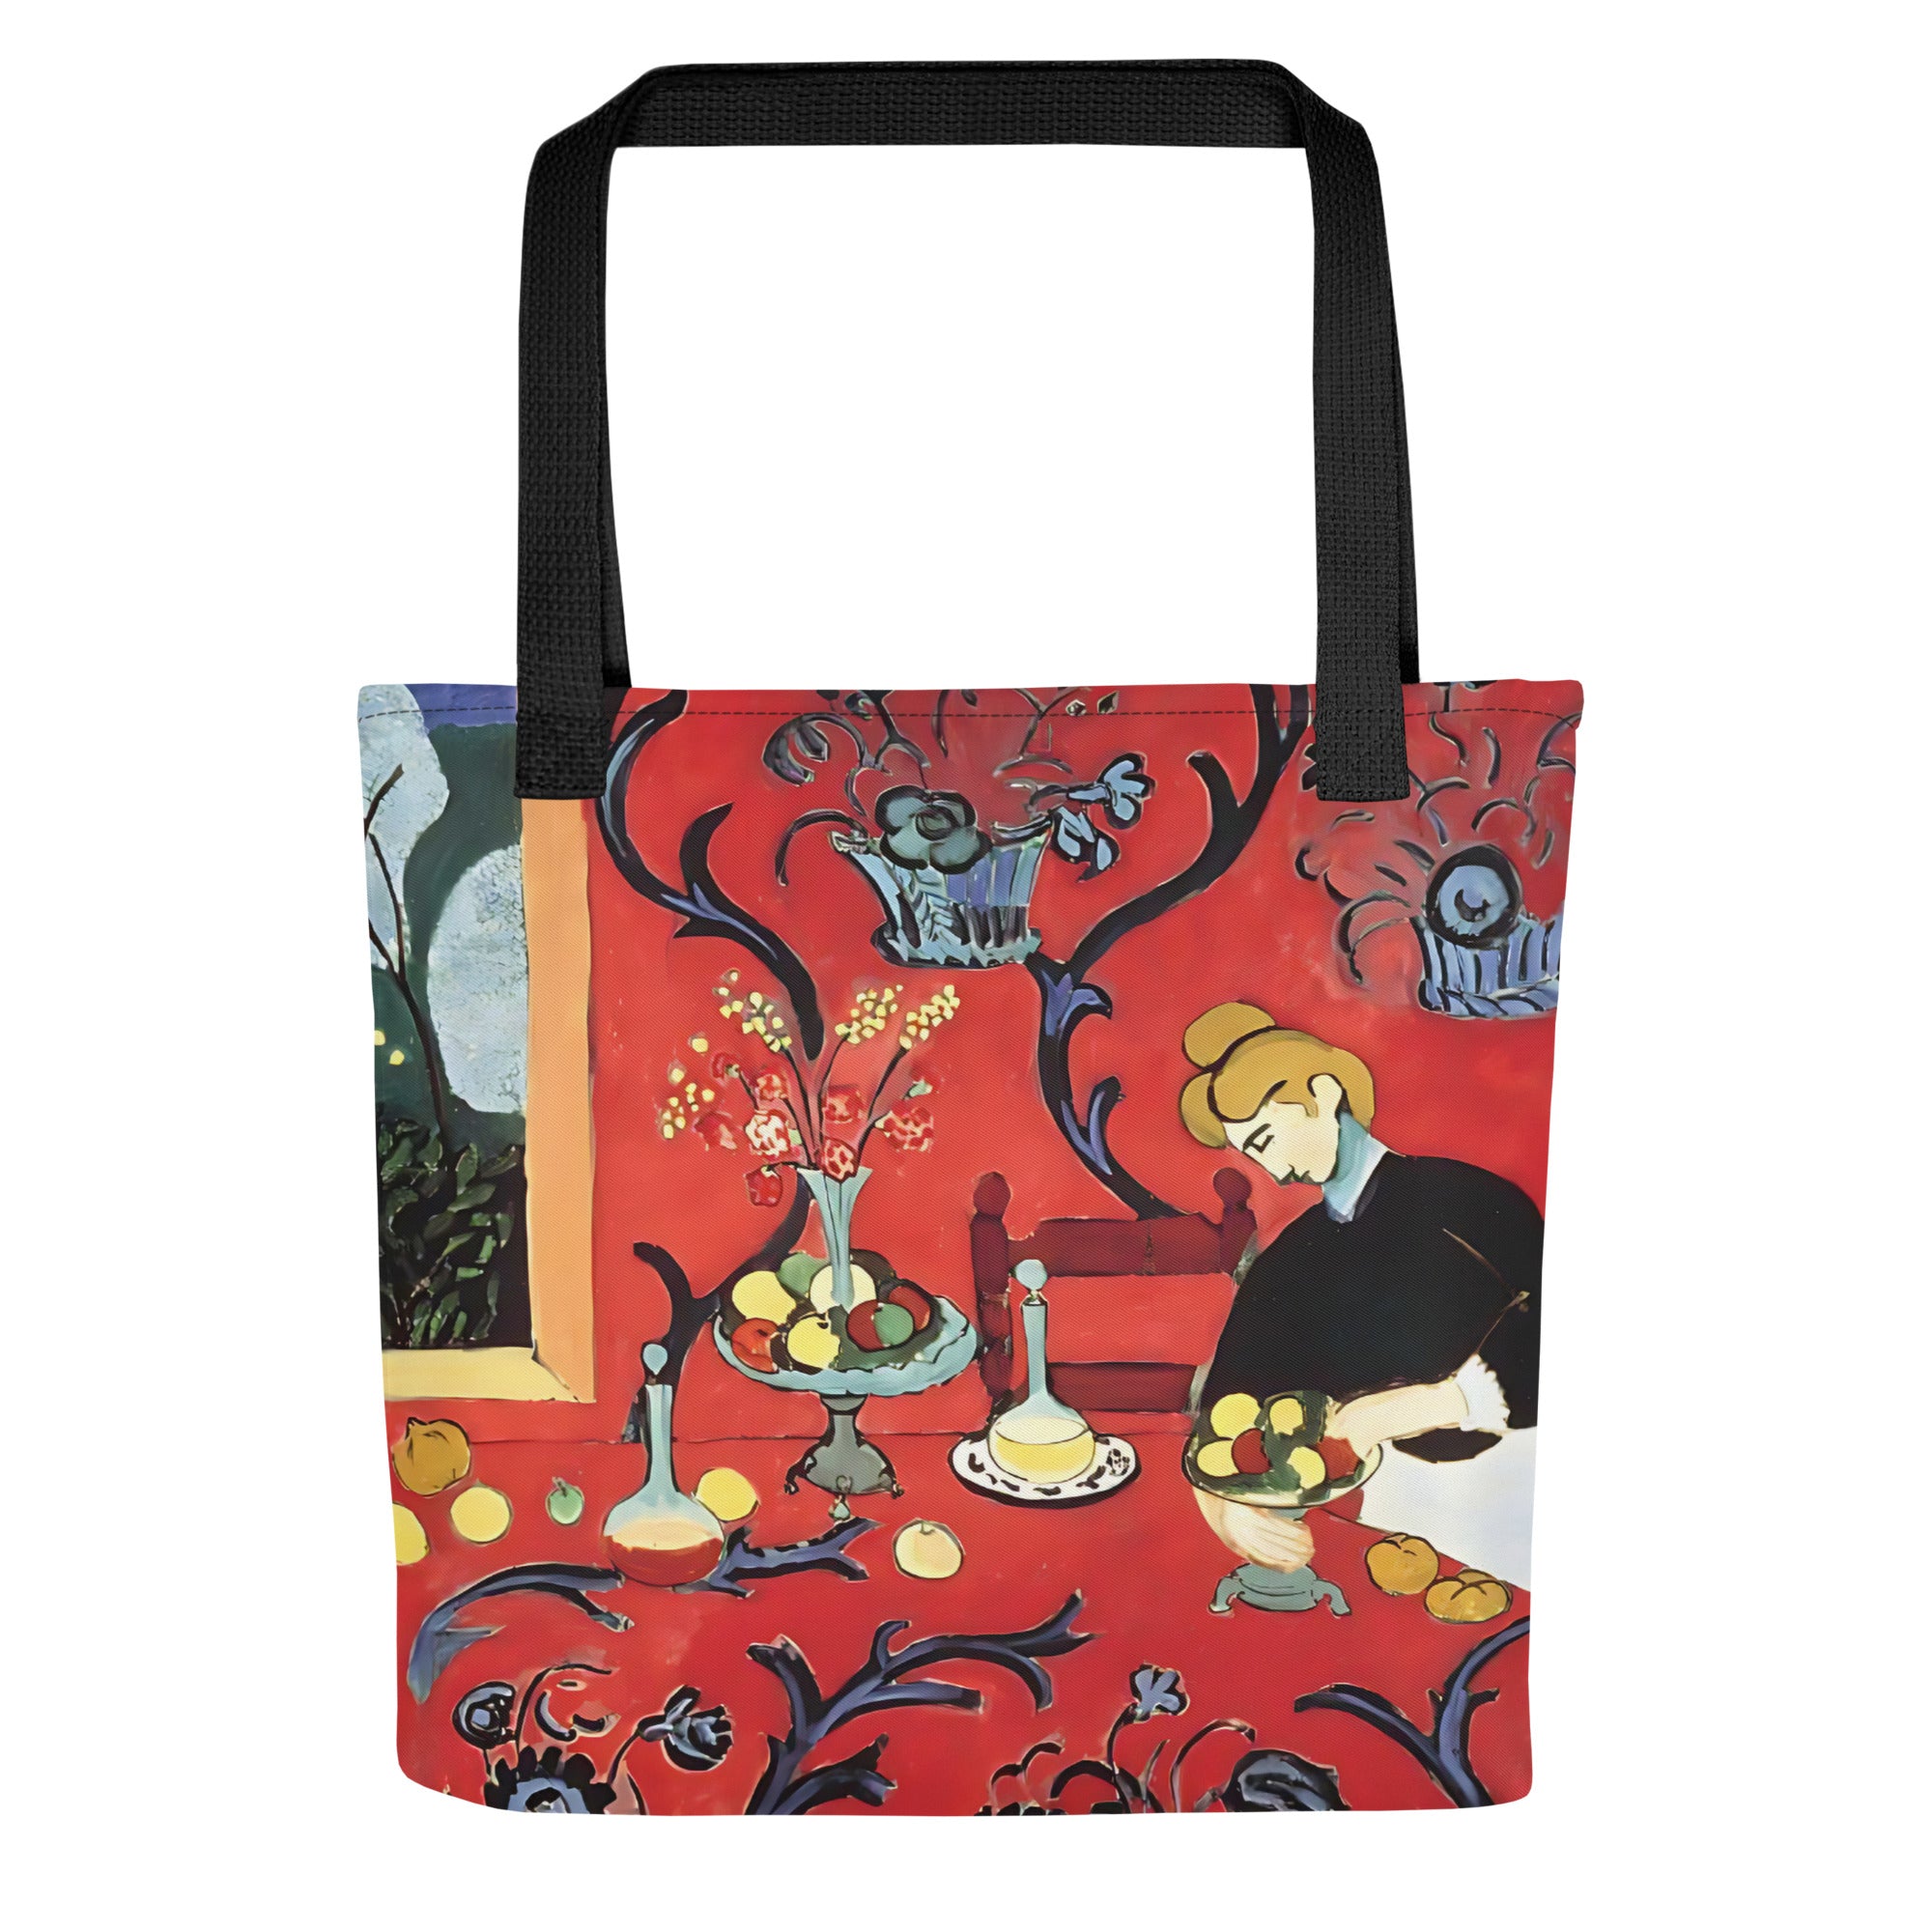 Henri Matisse ‘The Red Room’ Famous Painting Totebag | Allover Print Art Tote Bag